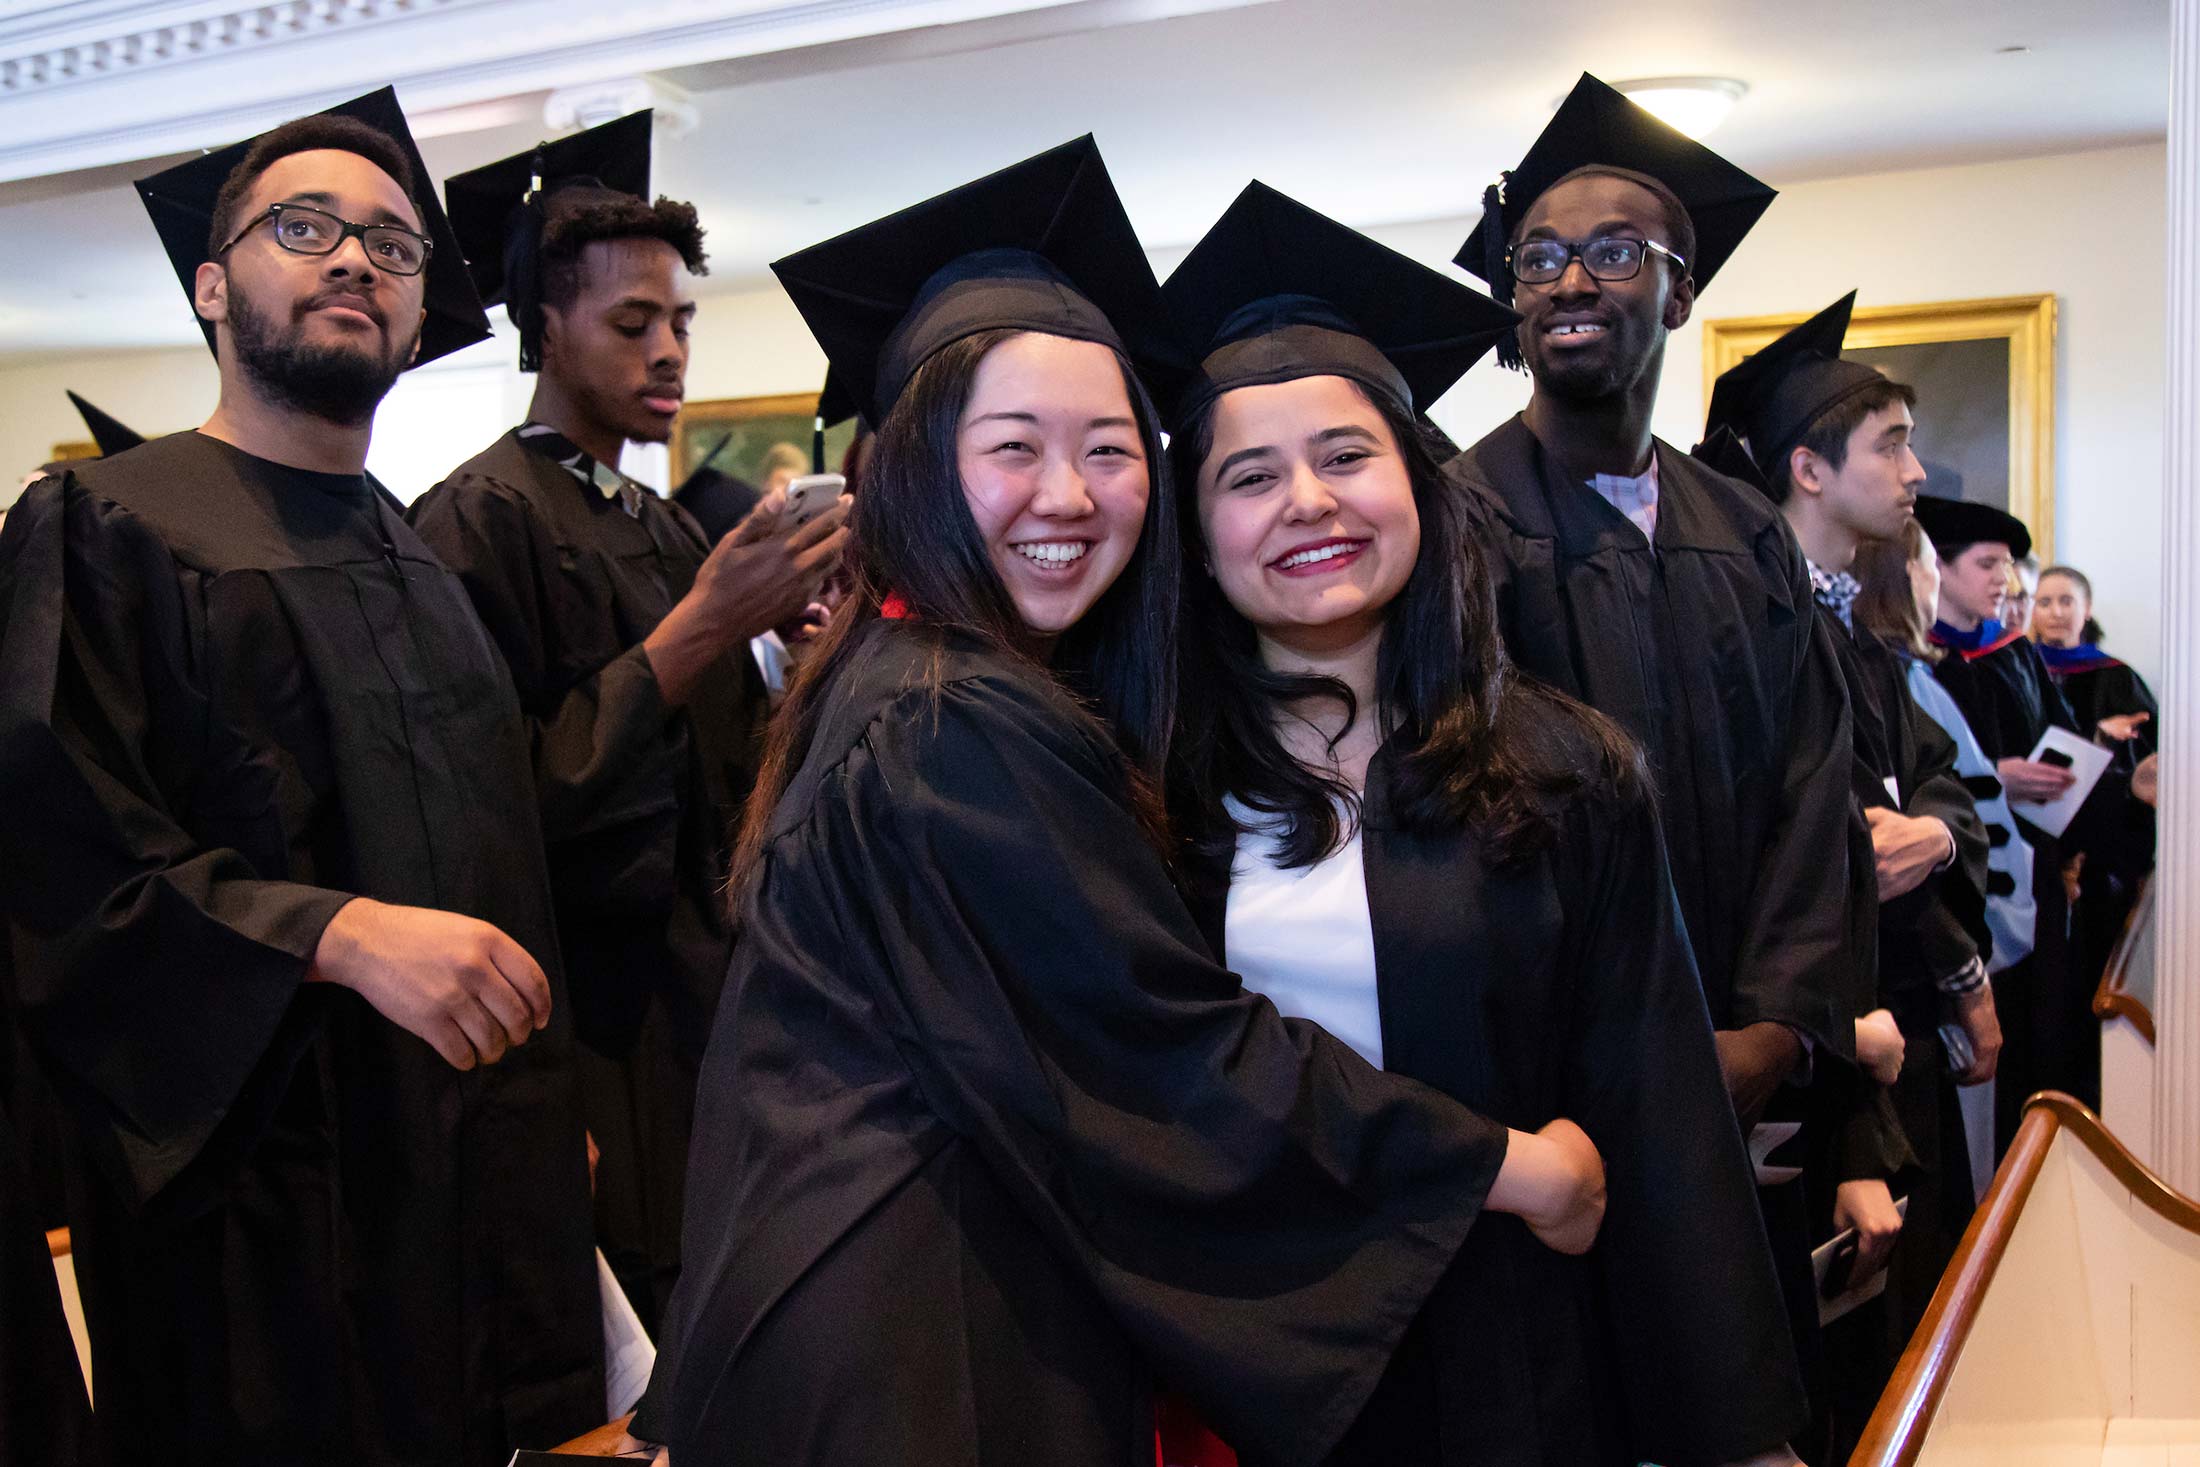 Smiling students wearing graduation gowns